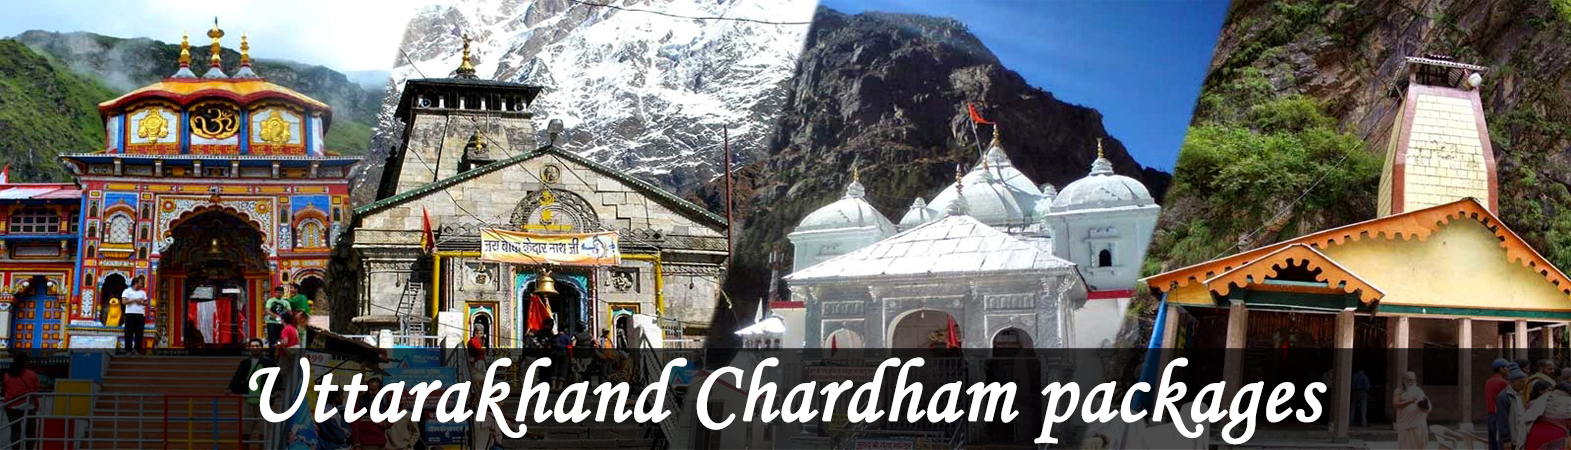 Chardham Tour Packages in Haridwar : Best Chardham tour Packages in Haridwar